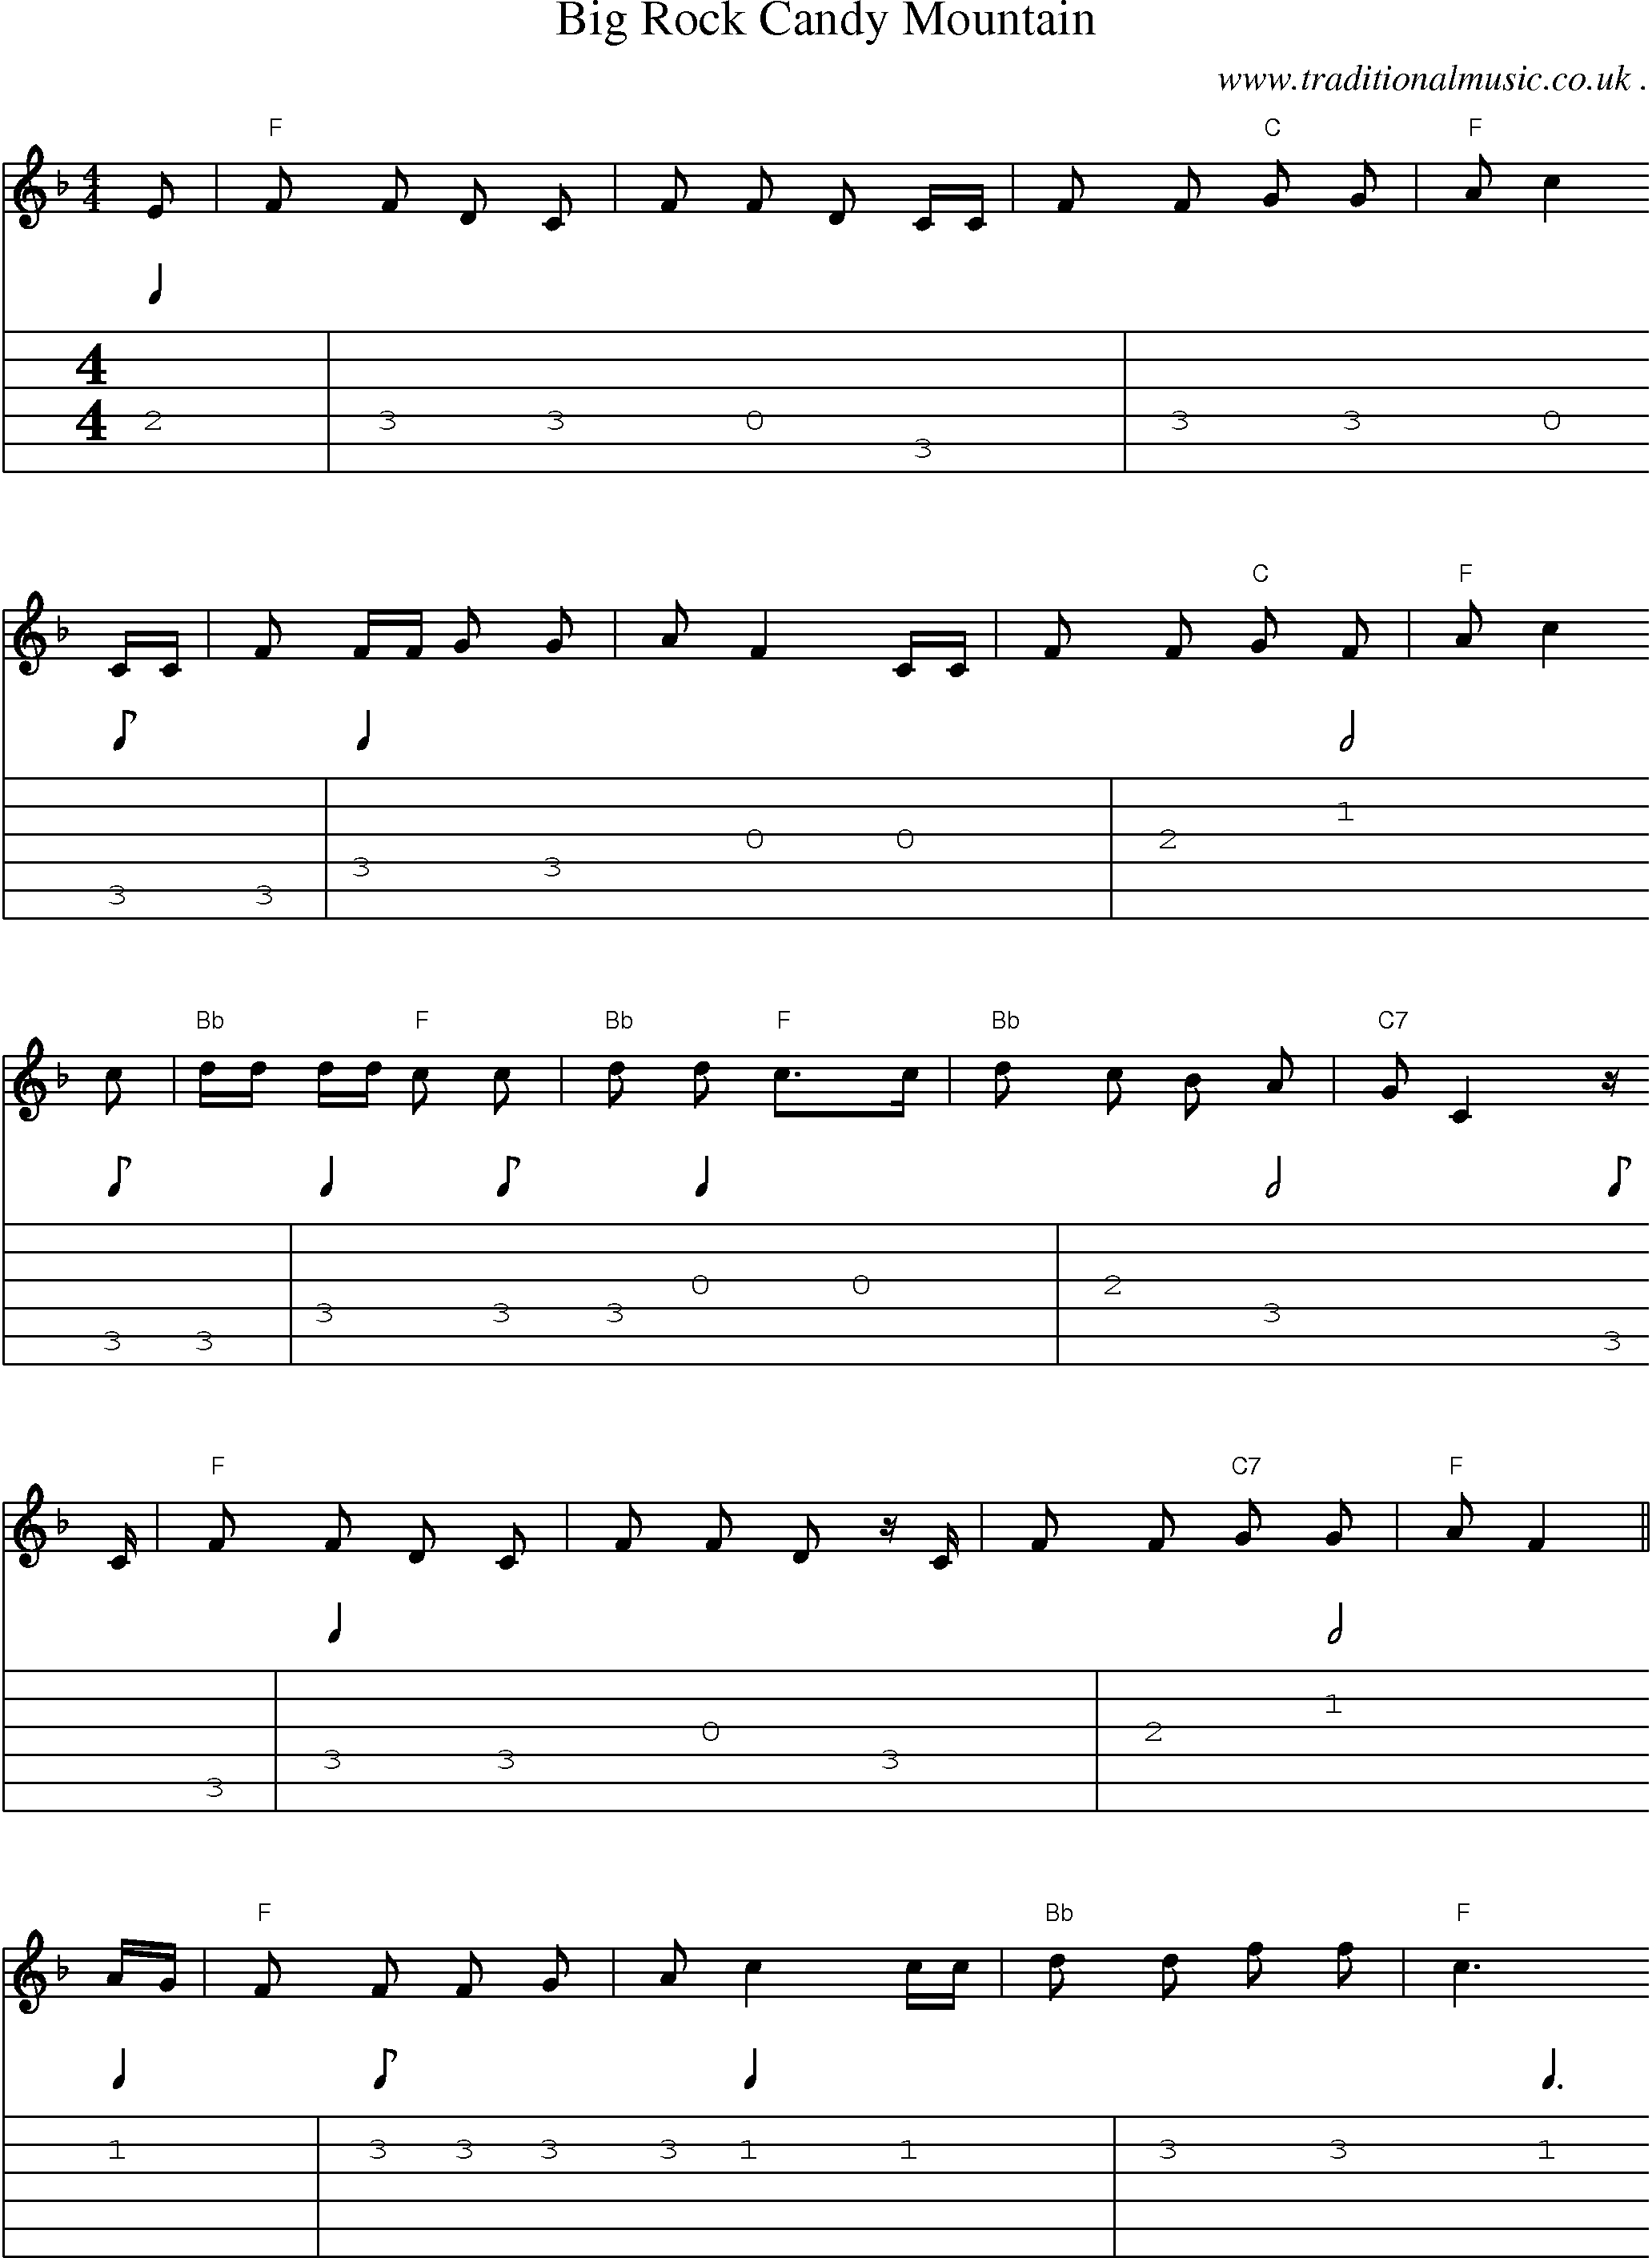 Music Score and Guitar Tabs for Big Rock Candy Mountain